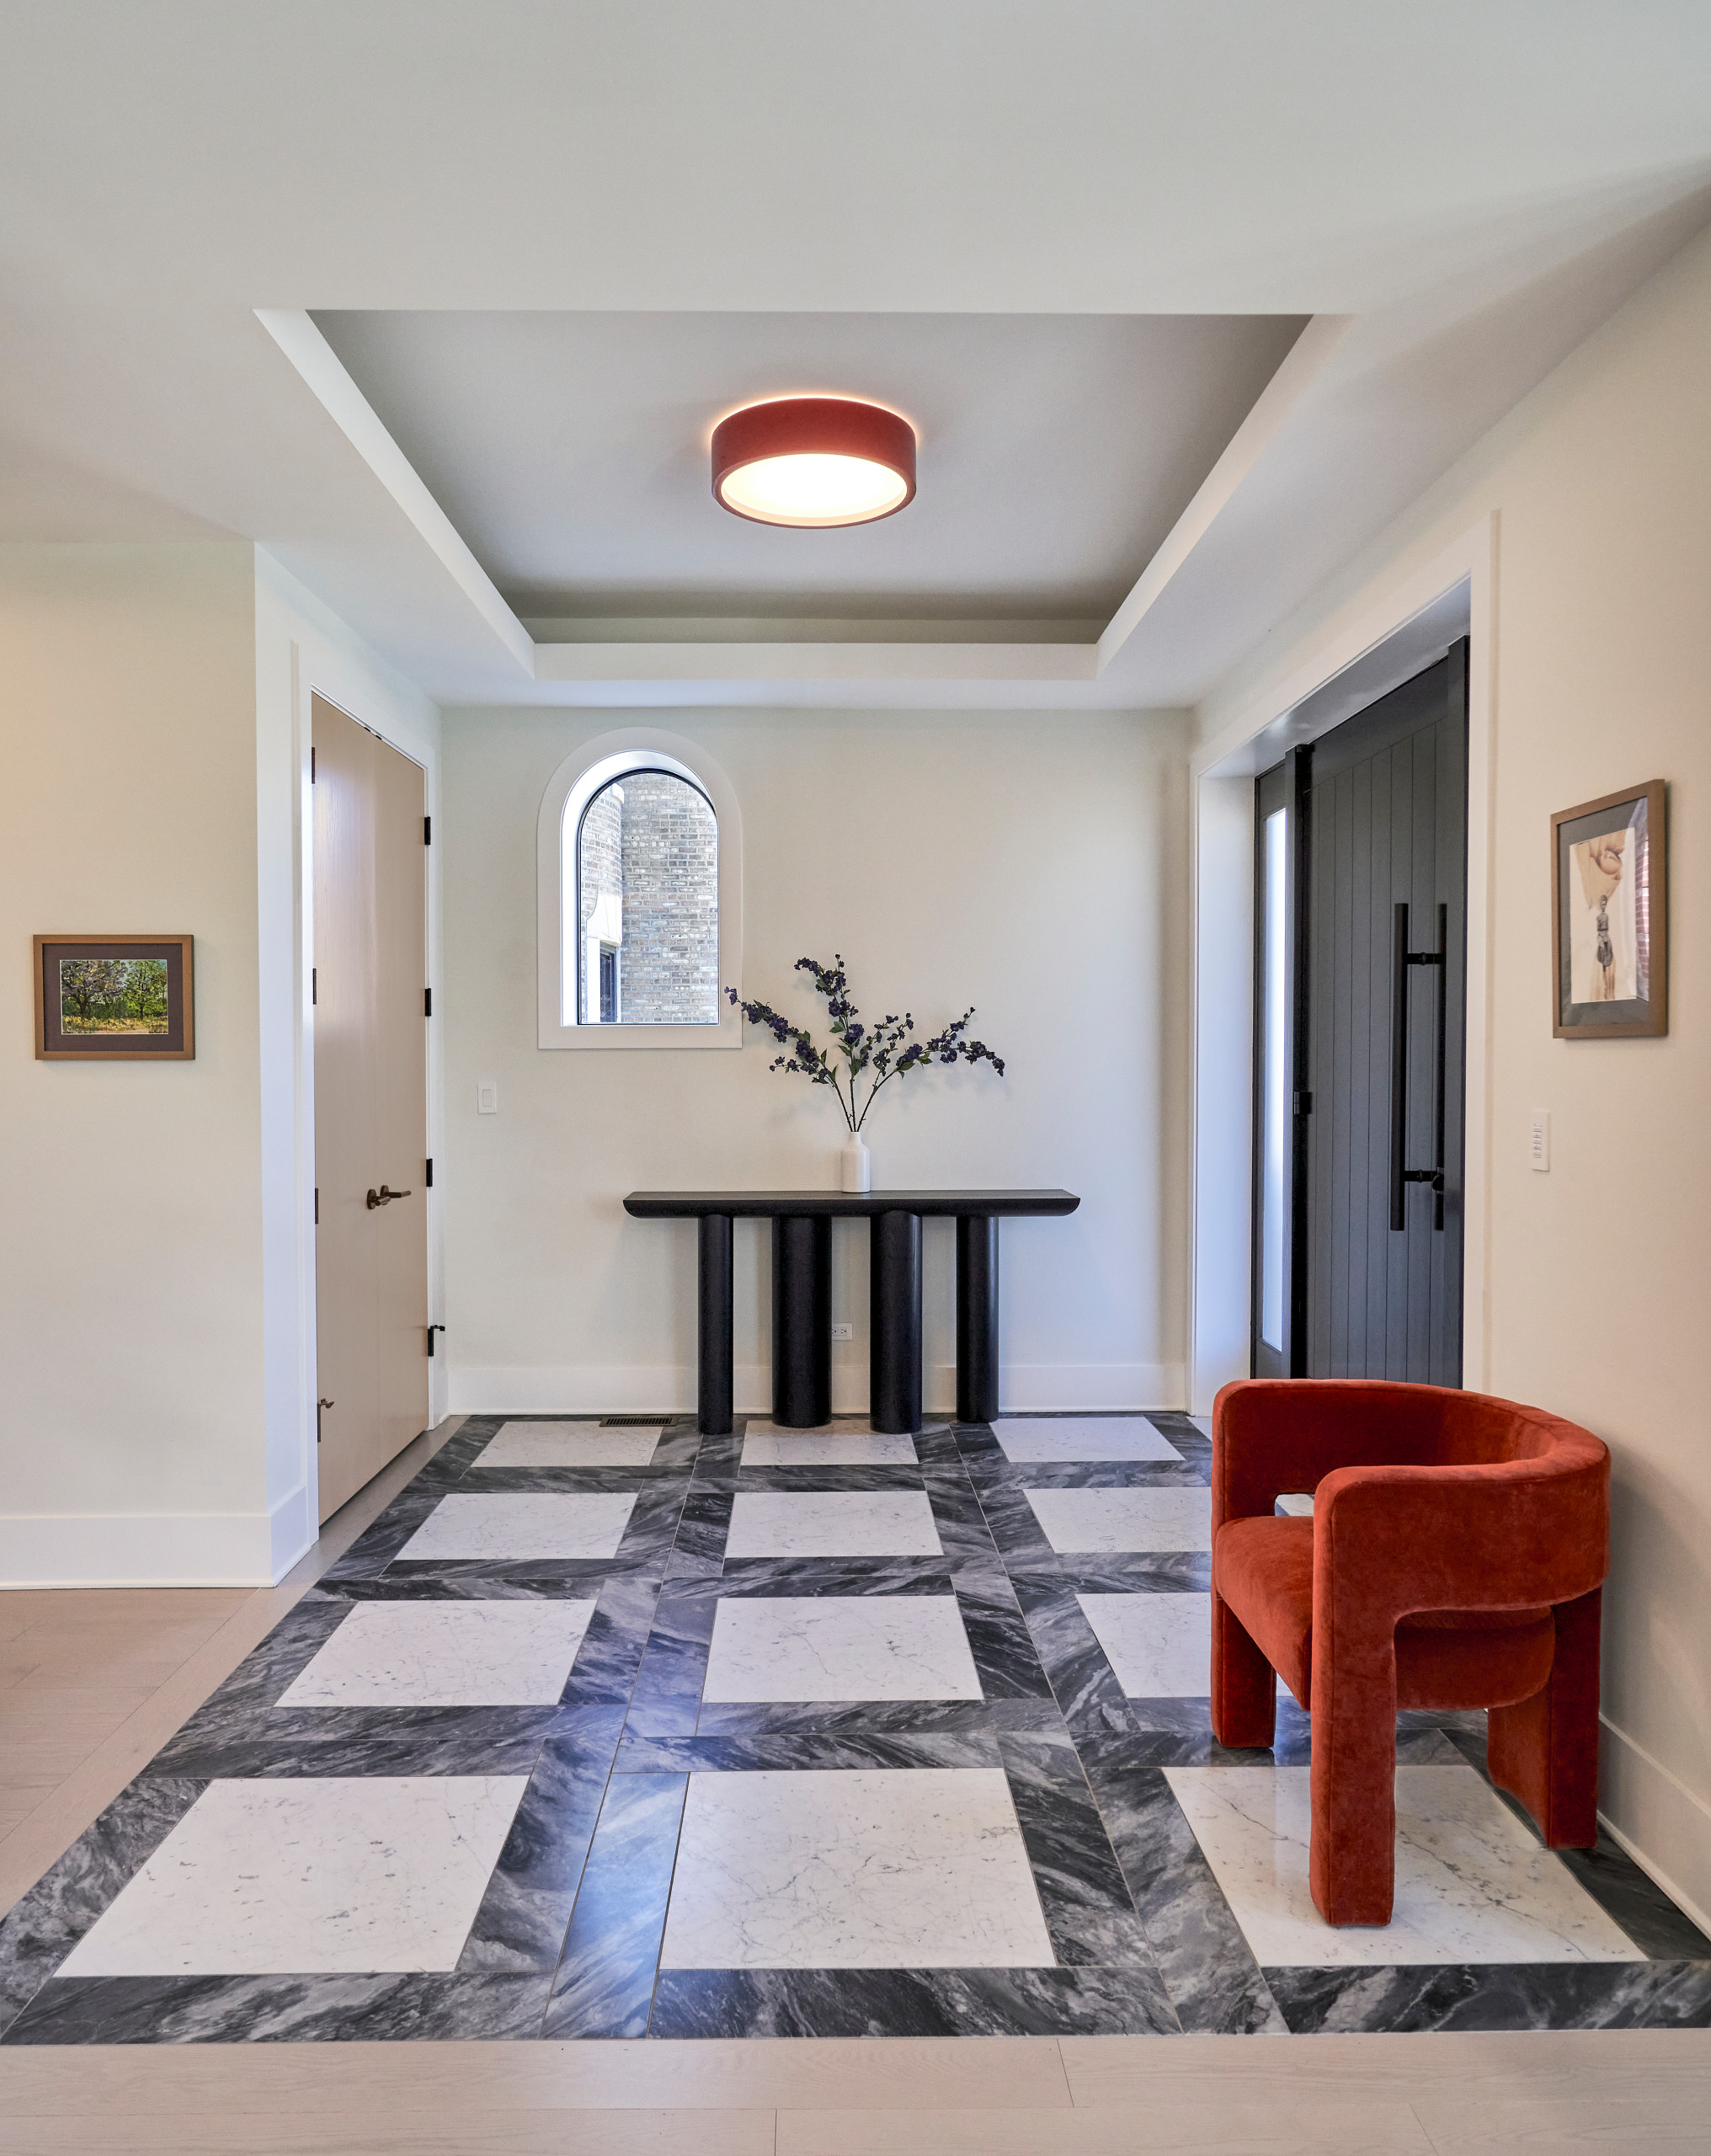 75 Tray Ceiling Entryway Ideas You'll Love - April, 2023 | Houzz